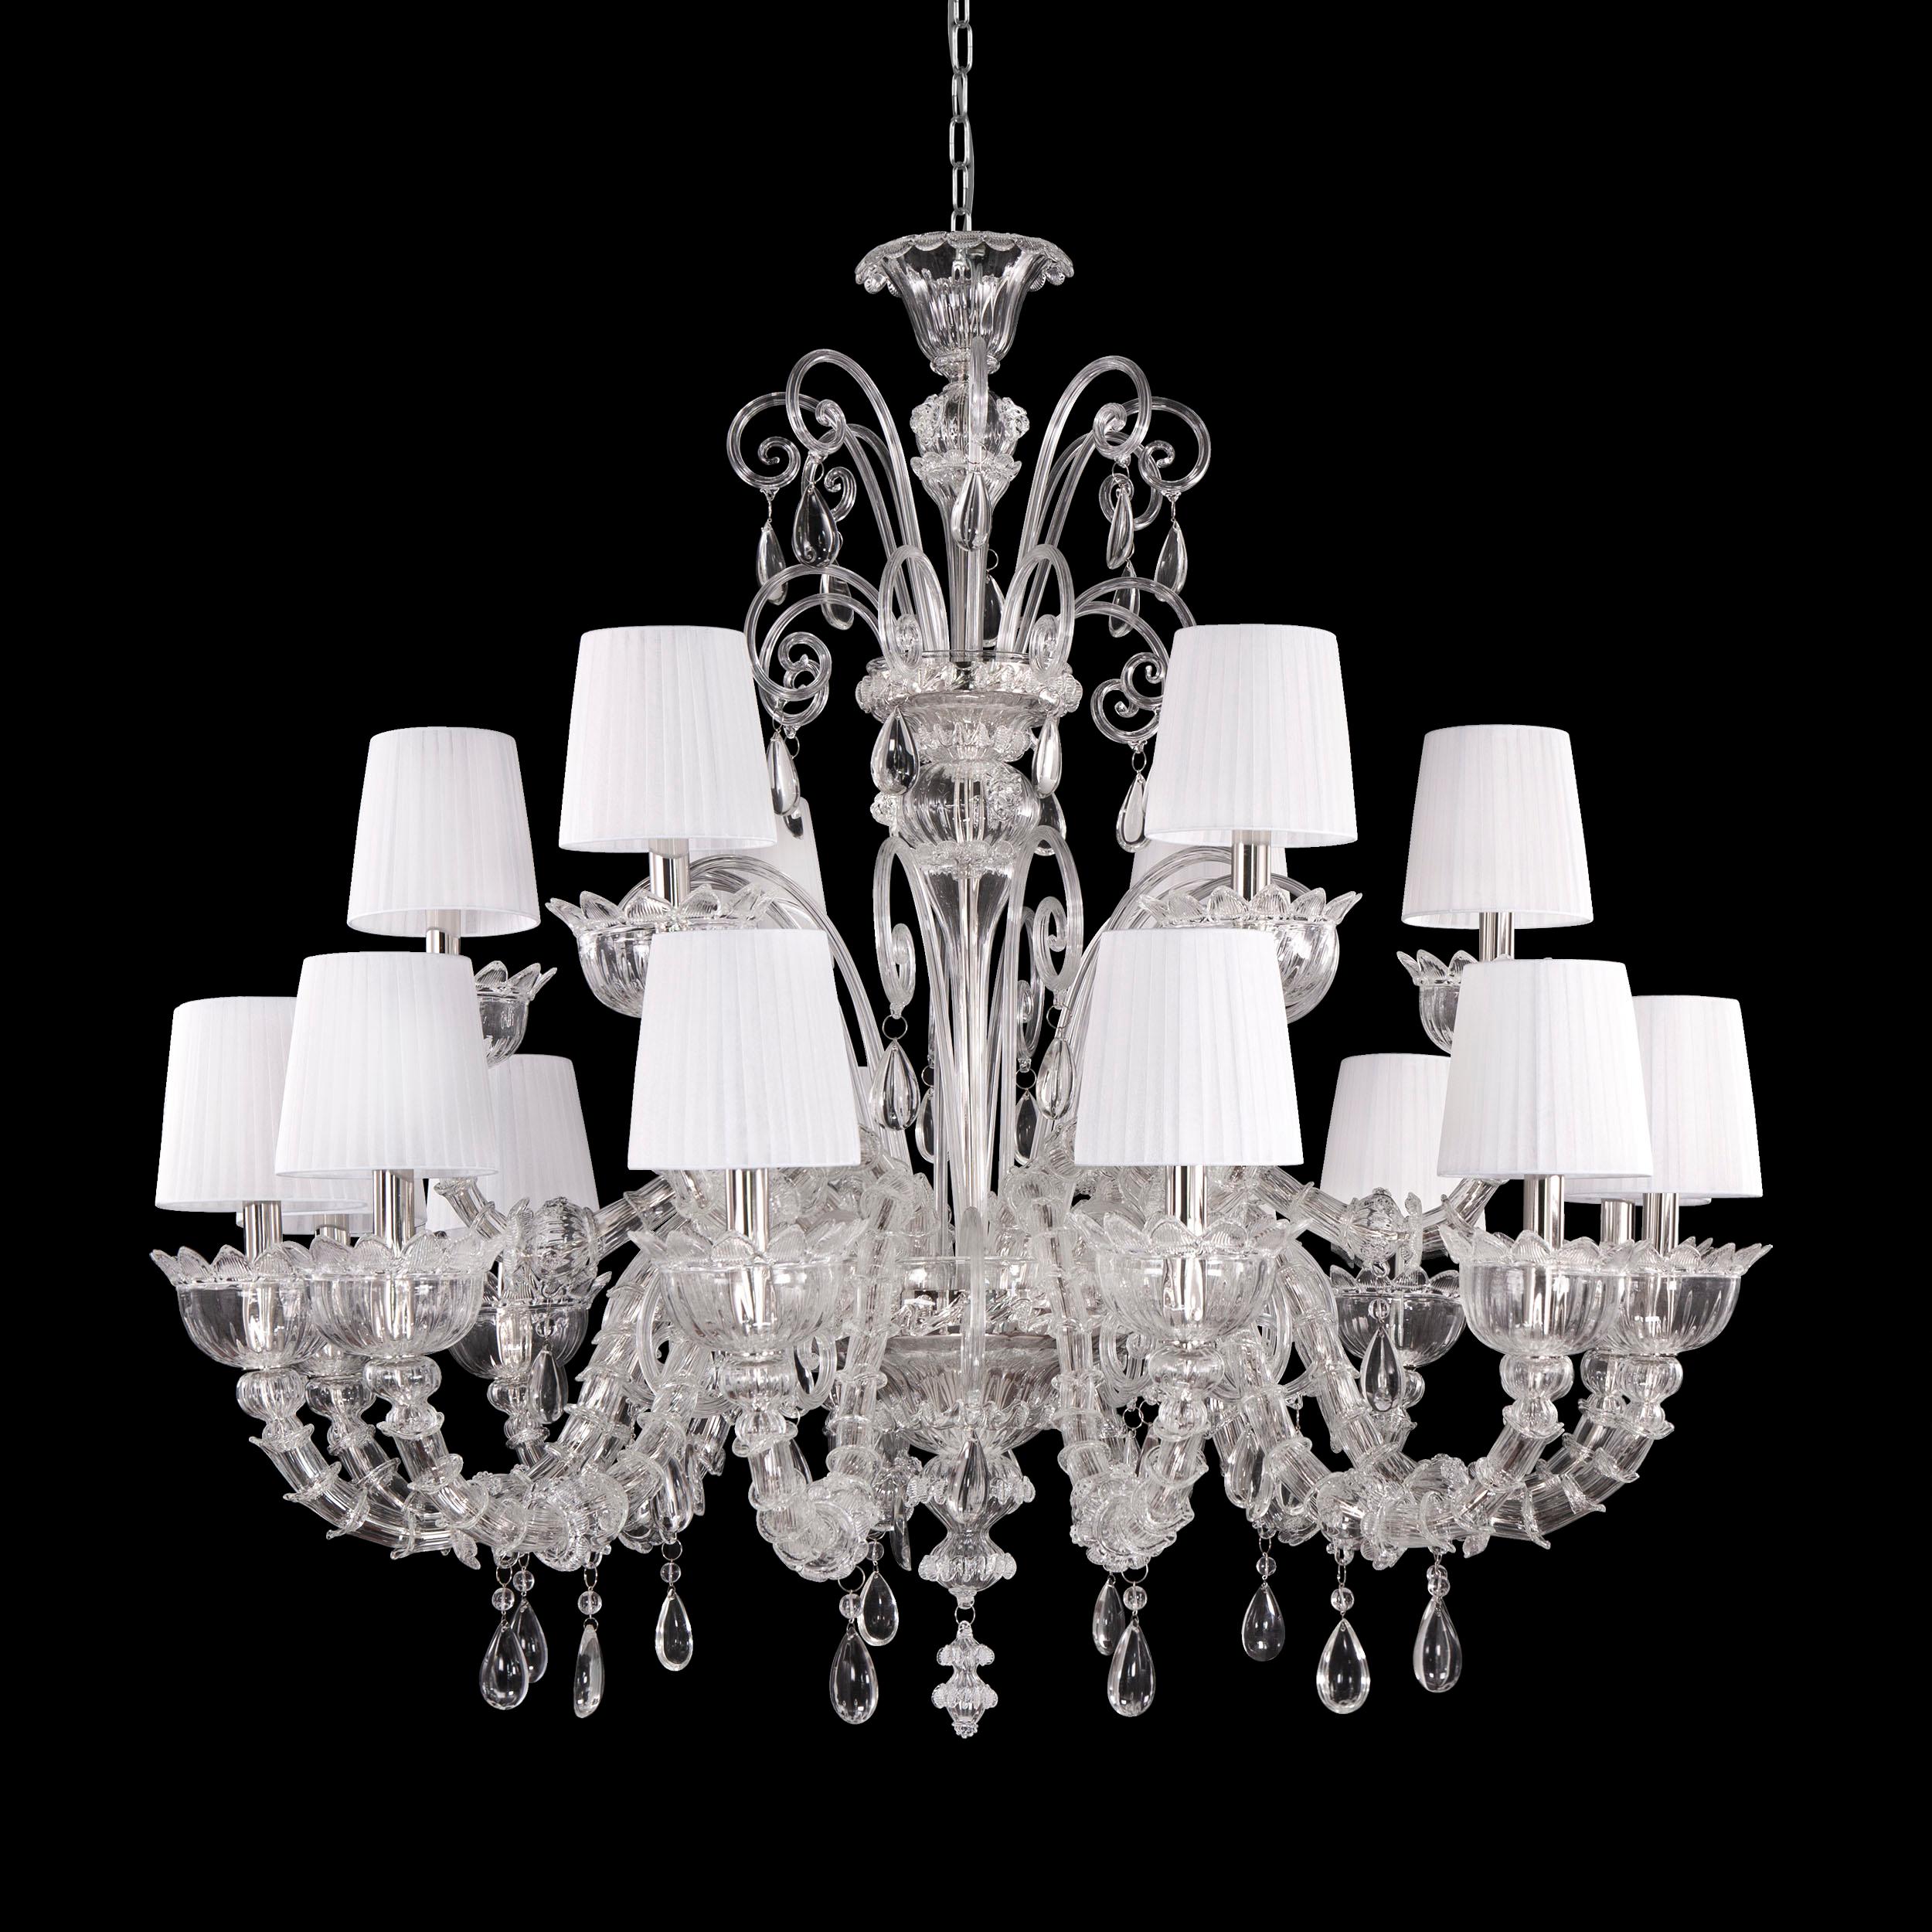 Montecristo chandelier 18 arms, artistic clear glass, white organza lampshades by Multiforme.
Montecristo collection is created with the typical elements of Venetian glass chandeliers. From the central column, decorated with “morrise” and roses,